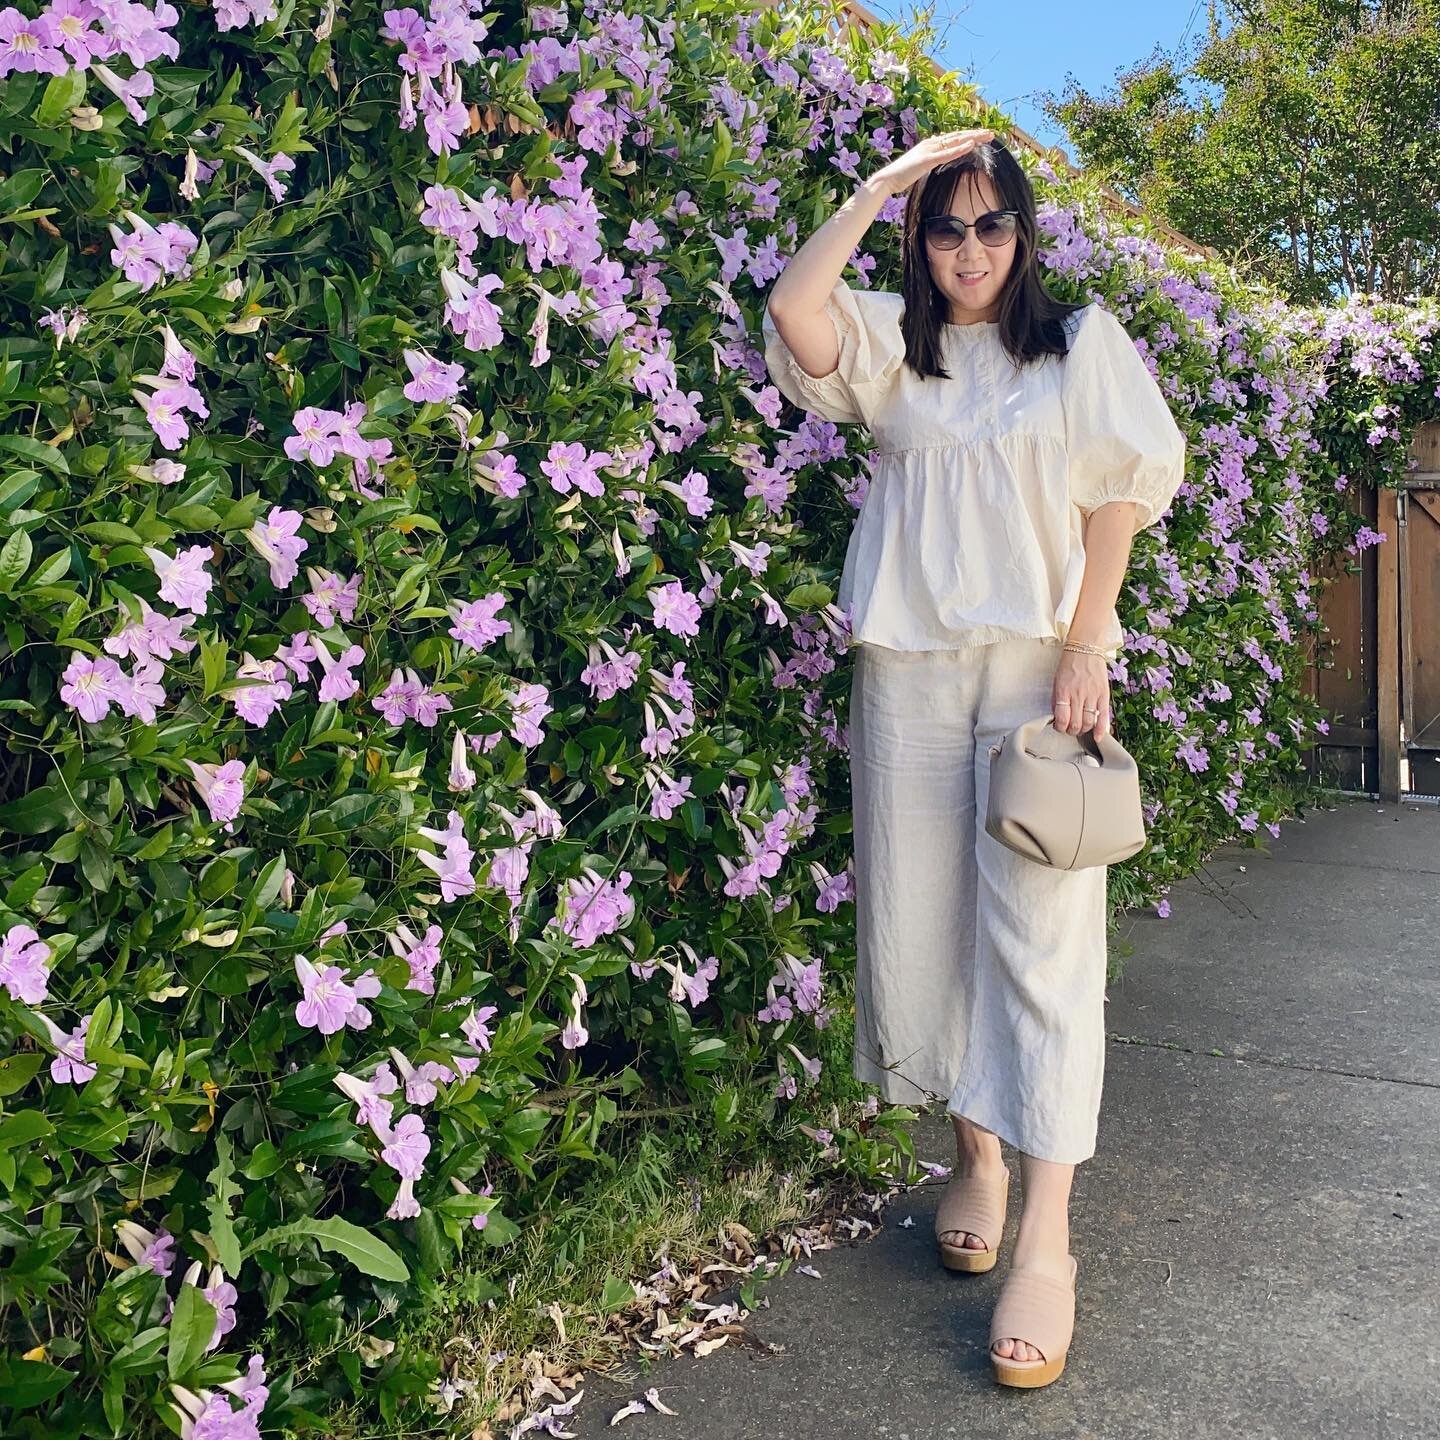 #tbt to when the flowers were blooming and all women had autonomy over their bodies
&mdash;&mdash;&mdash;
Outfit details
Top: @rudyjudeco day blouse
Pants: #onlychildclothing 
Shoes: @beklinawoman 
Bag: @polene_paris 
.
.
.

#slowfashion #fairfashion